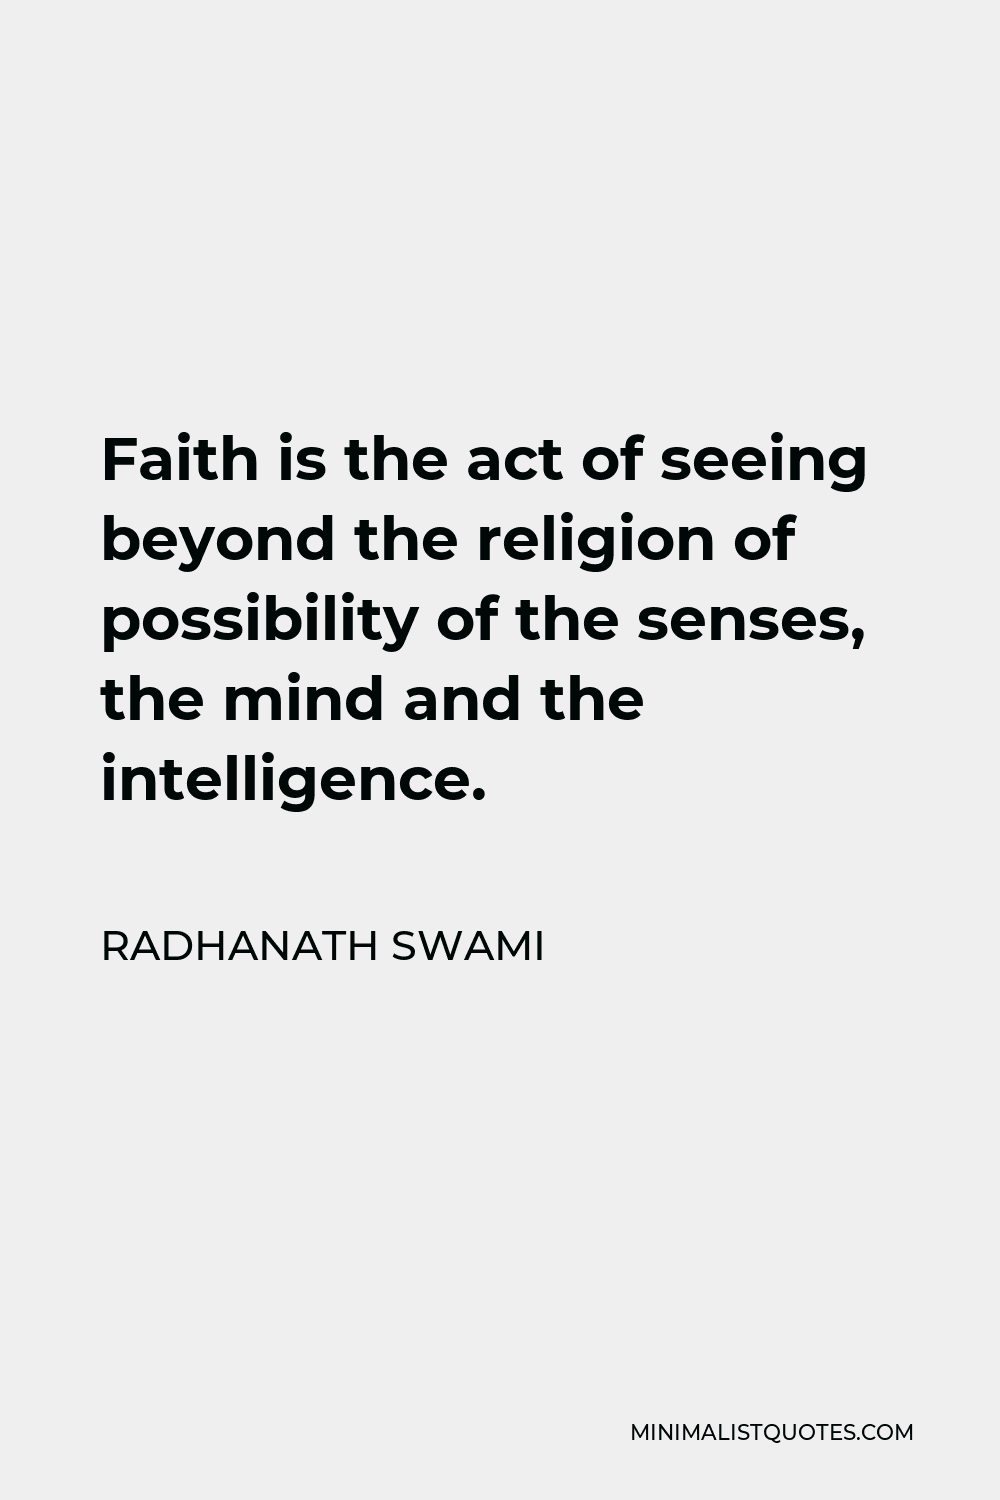 Radhanath Swami Quote - Faith is the act of seeing beyond the religion of possibility of the senses, the mind and the intelligence.